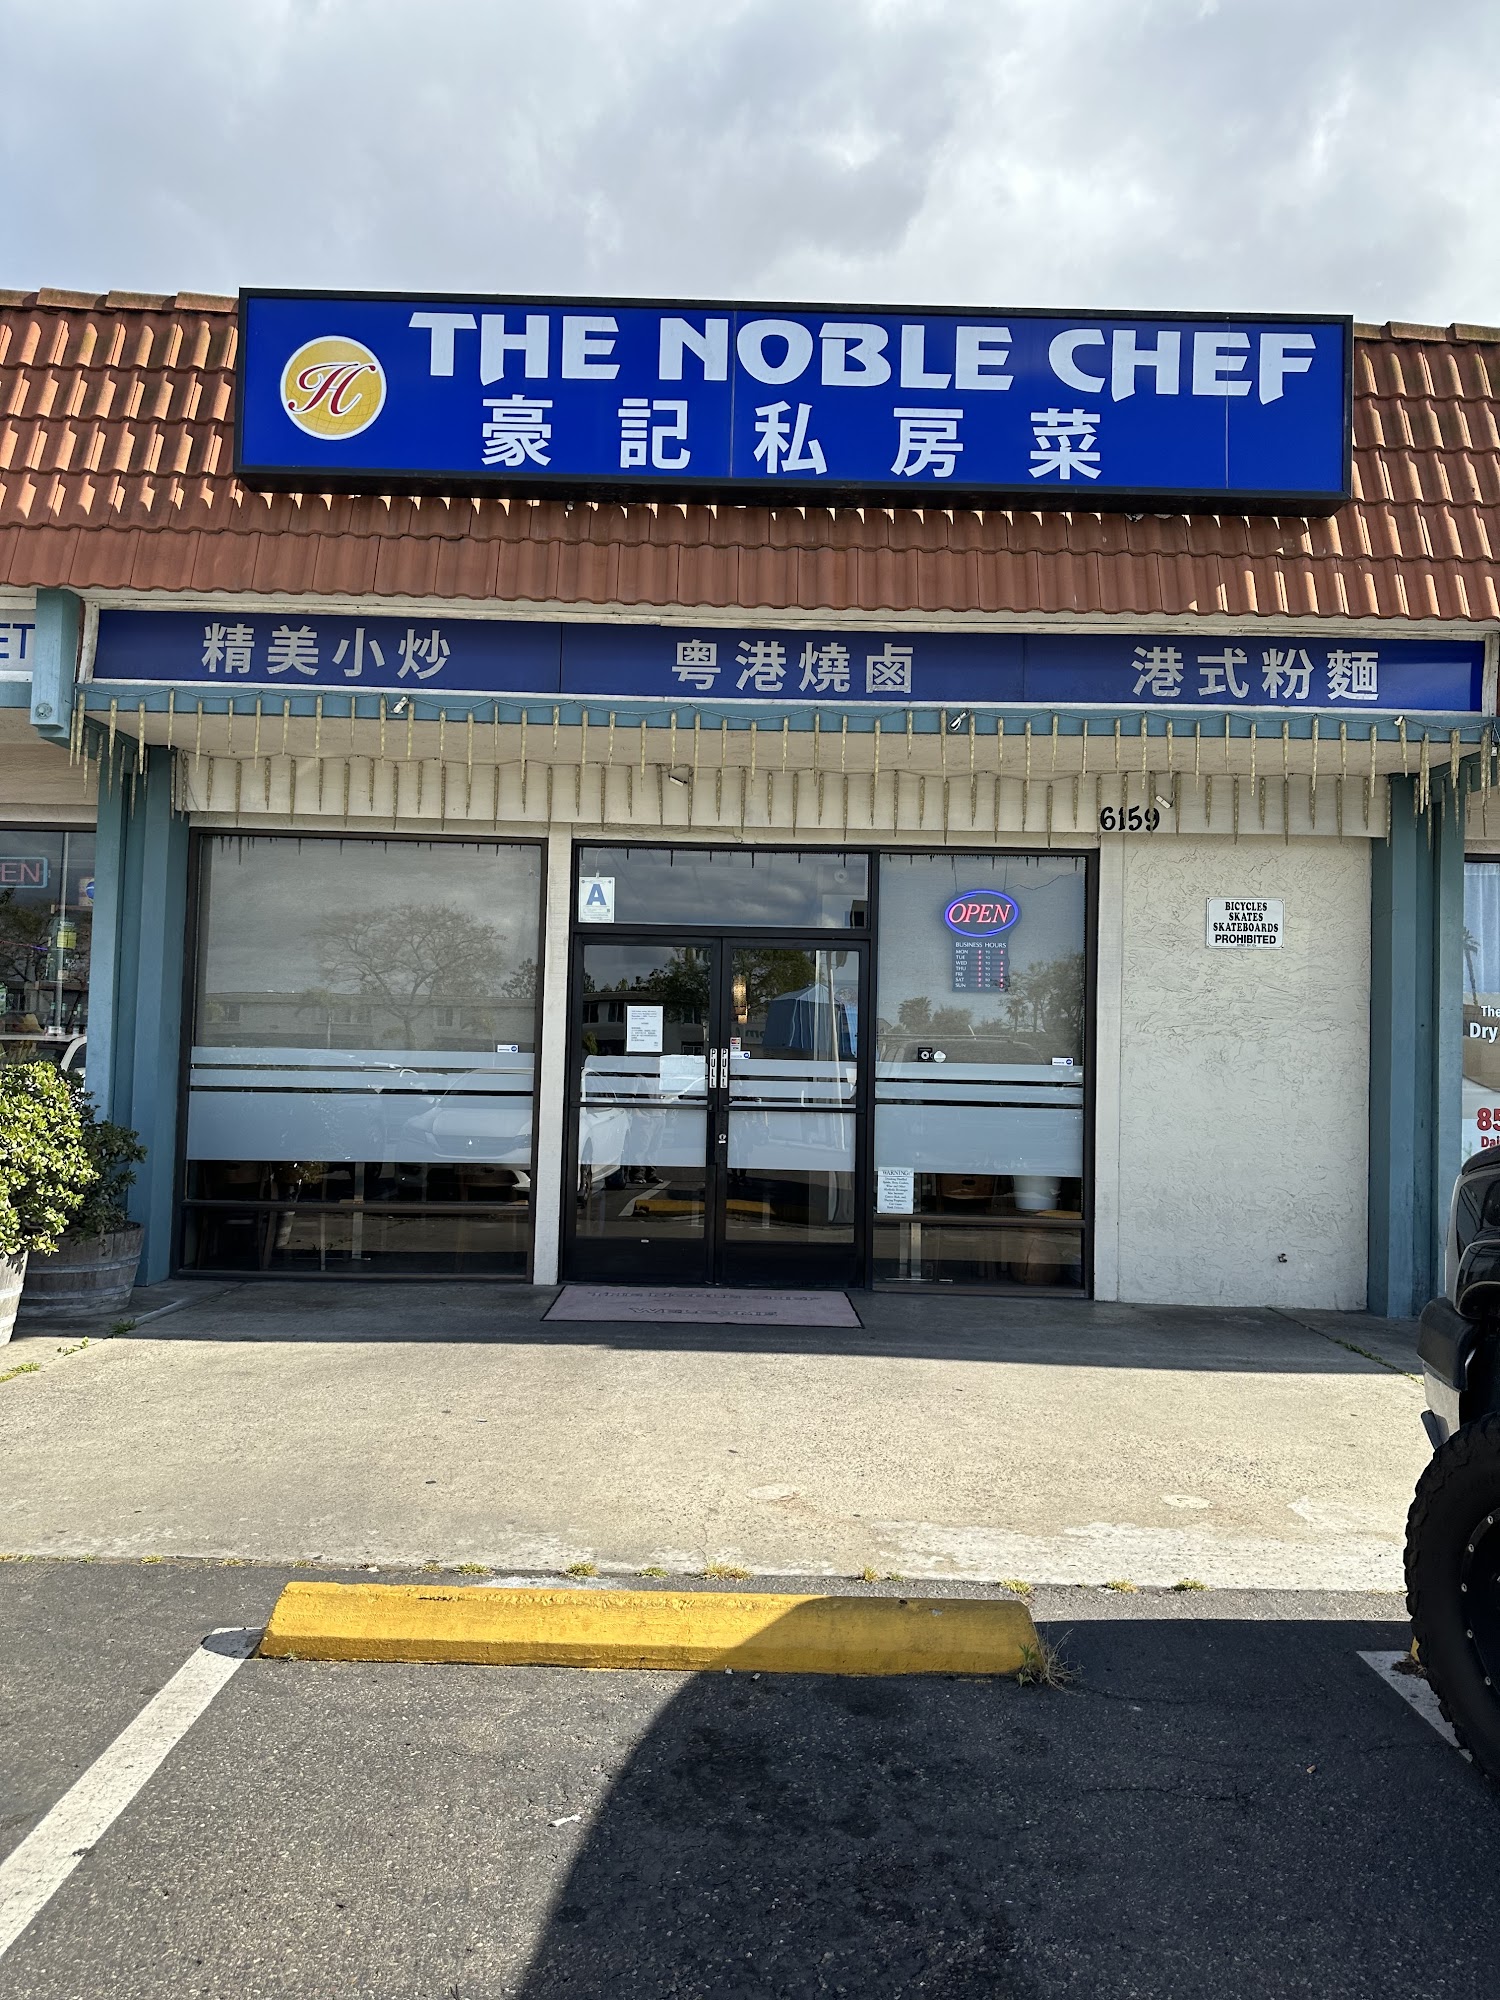 The Noble Chef (豪記)